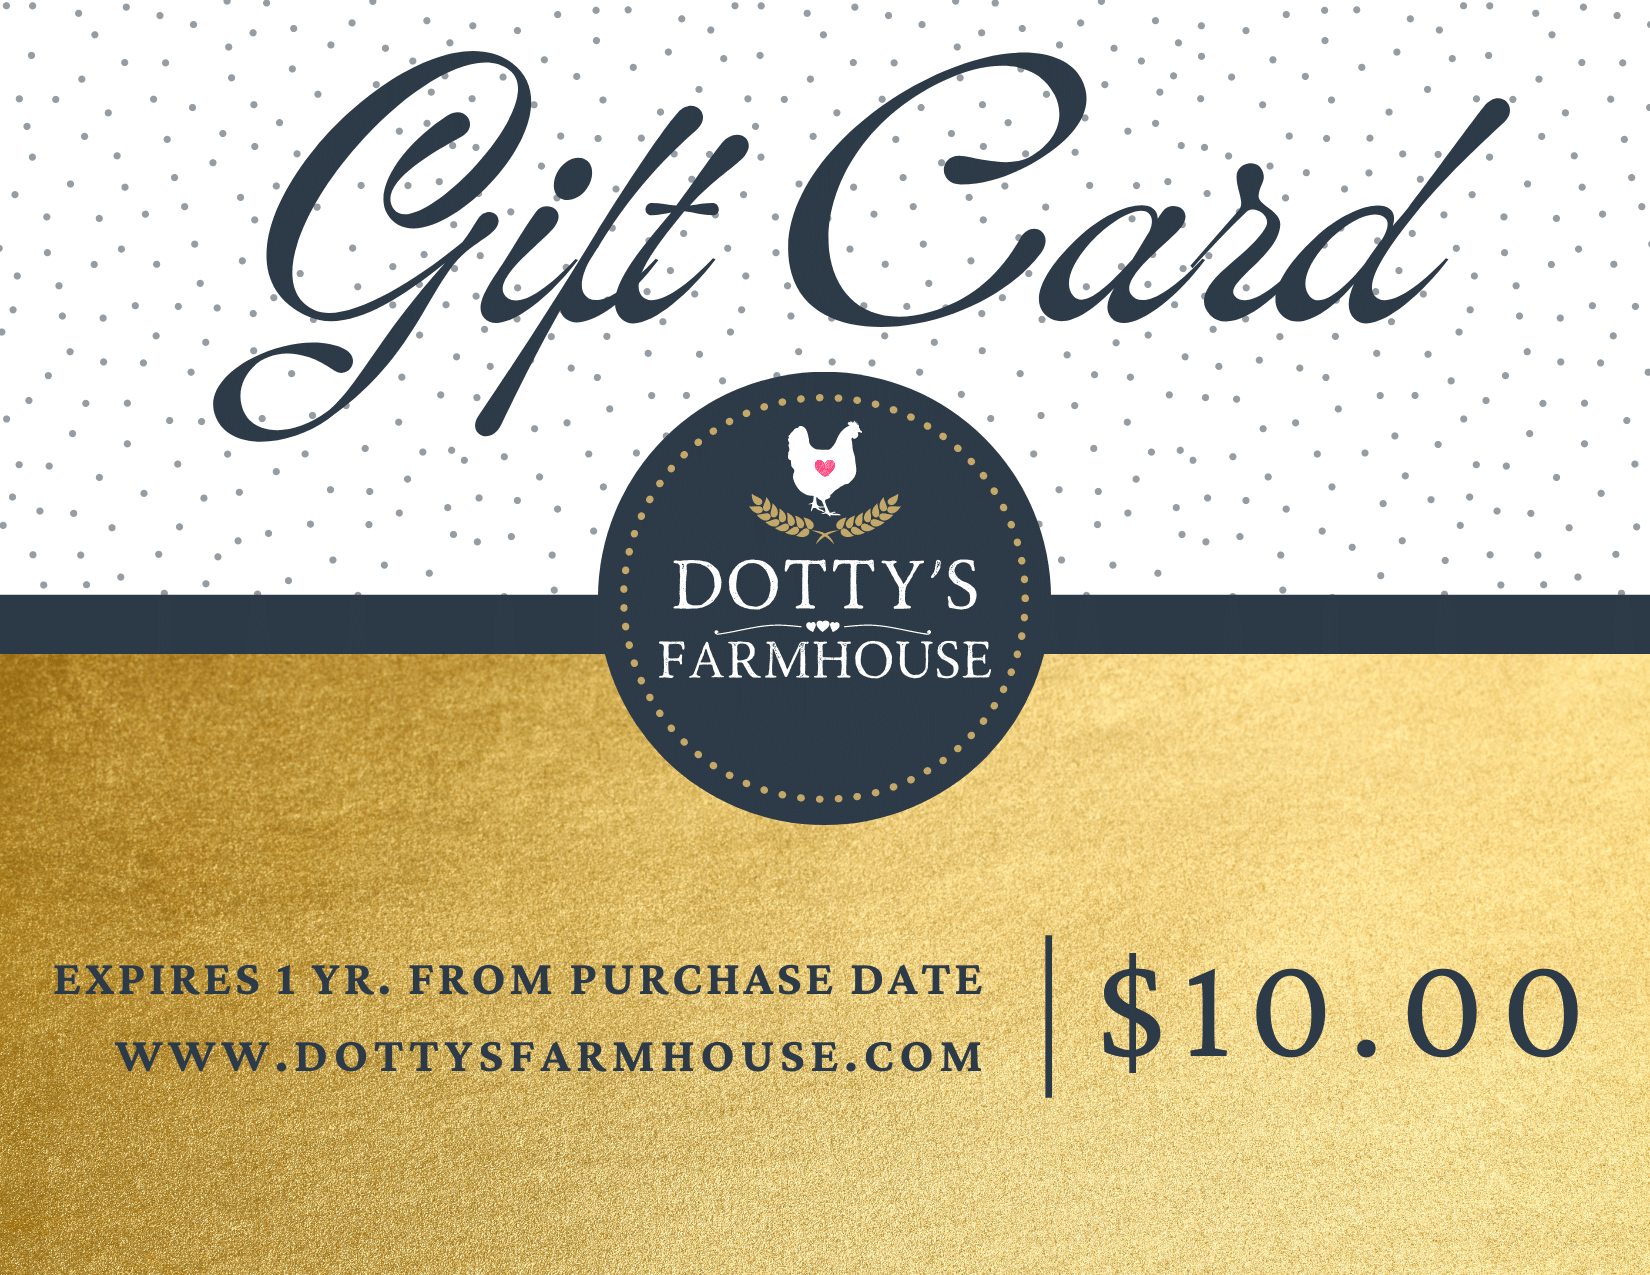 Gift Cards $10.00 / Email Gift Card Dotty's Farmhouse Gift Card